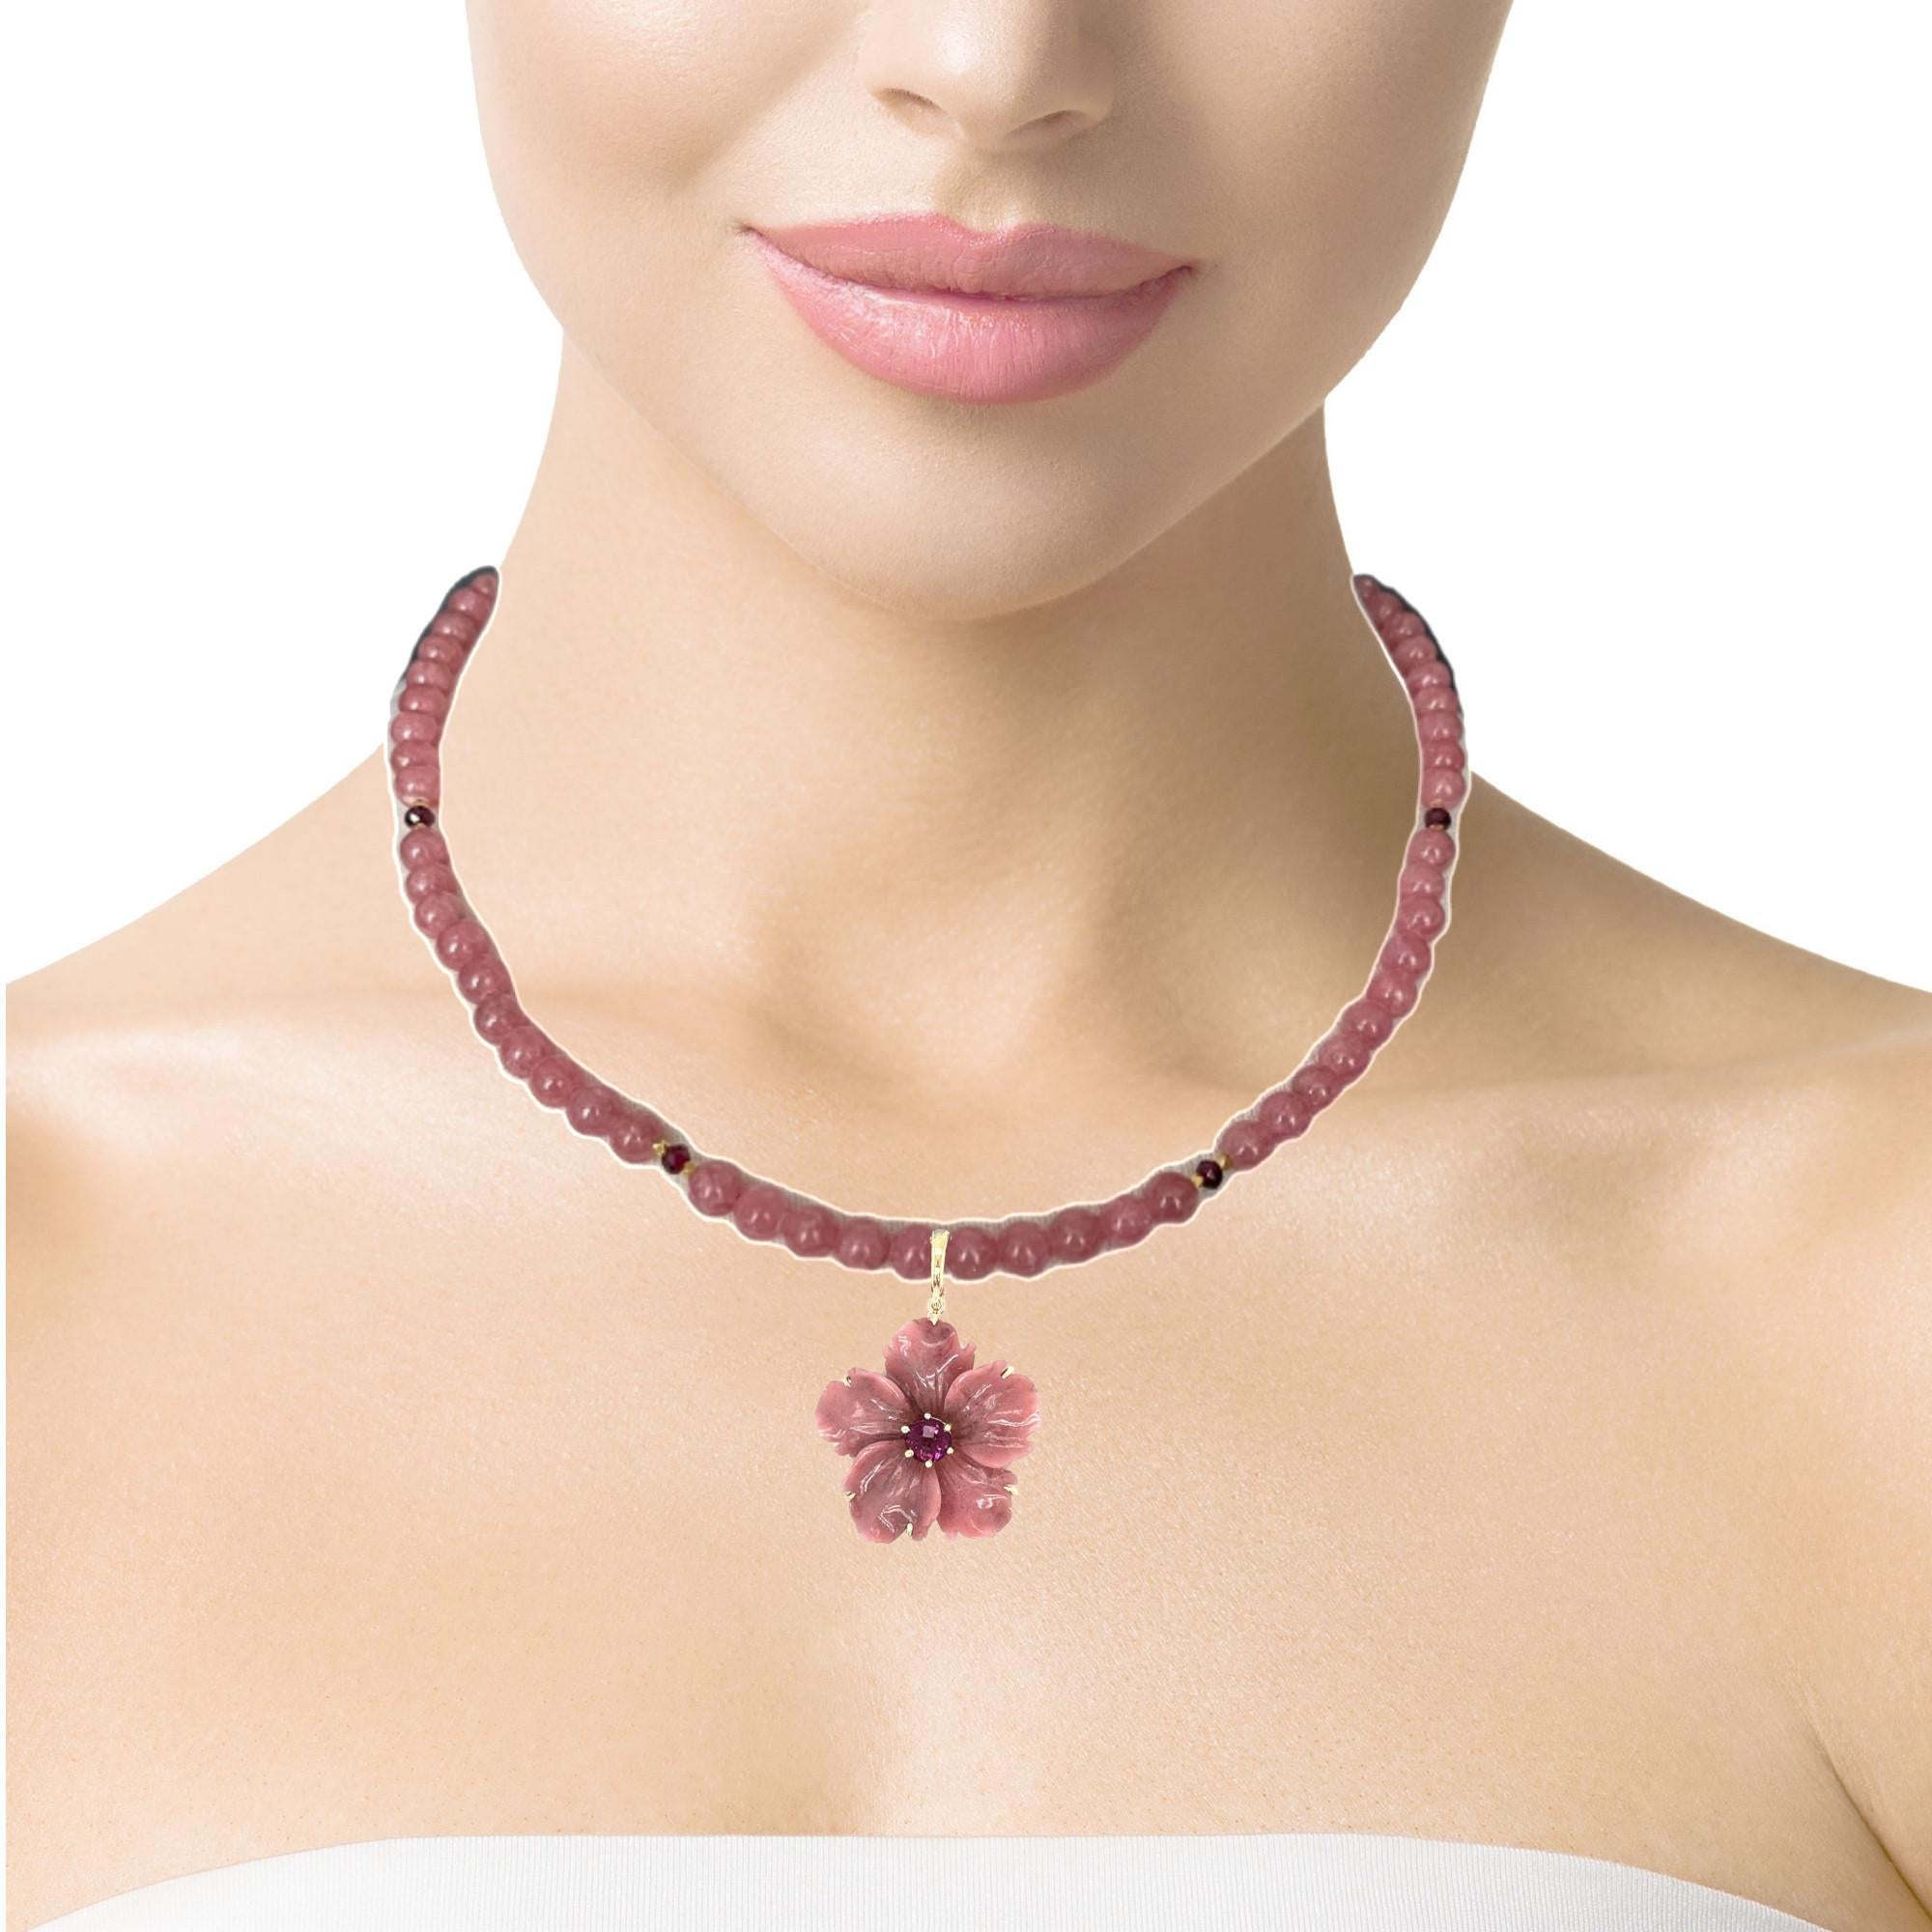  Rhodochrosite Beaded Necklace with Hand Carved Rhodonite Floral Pendant  For Sale 2